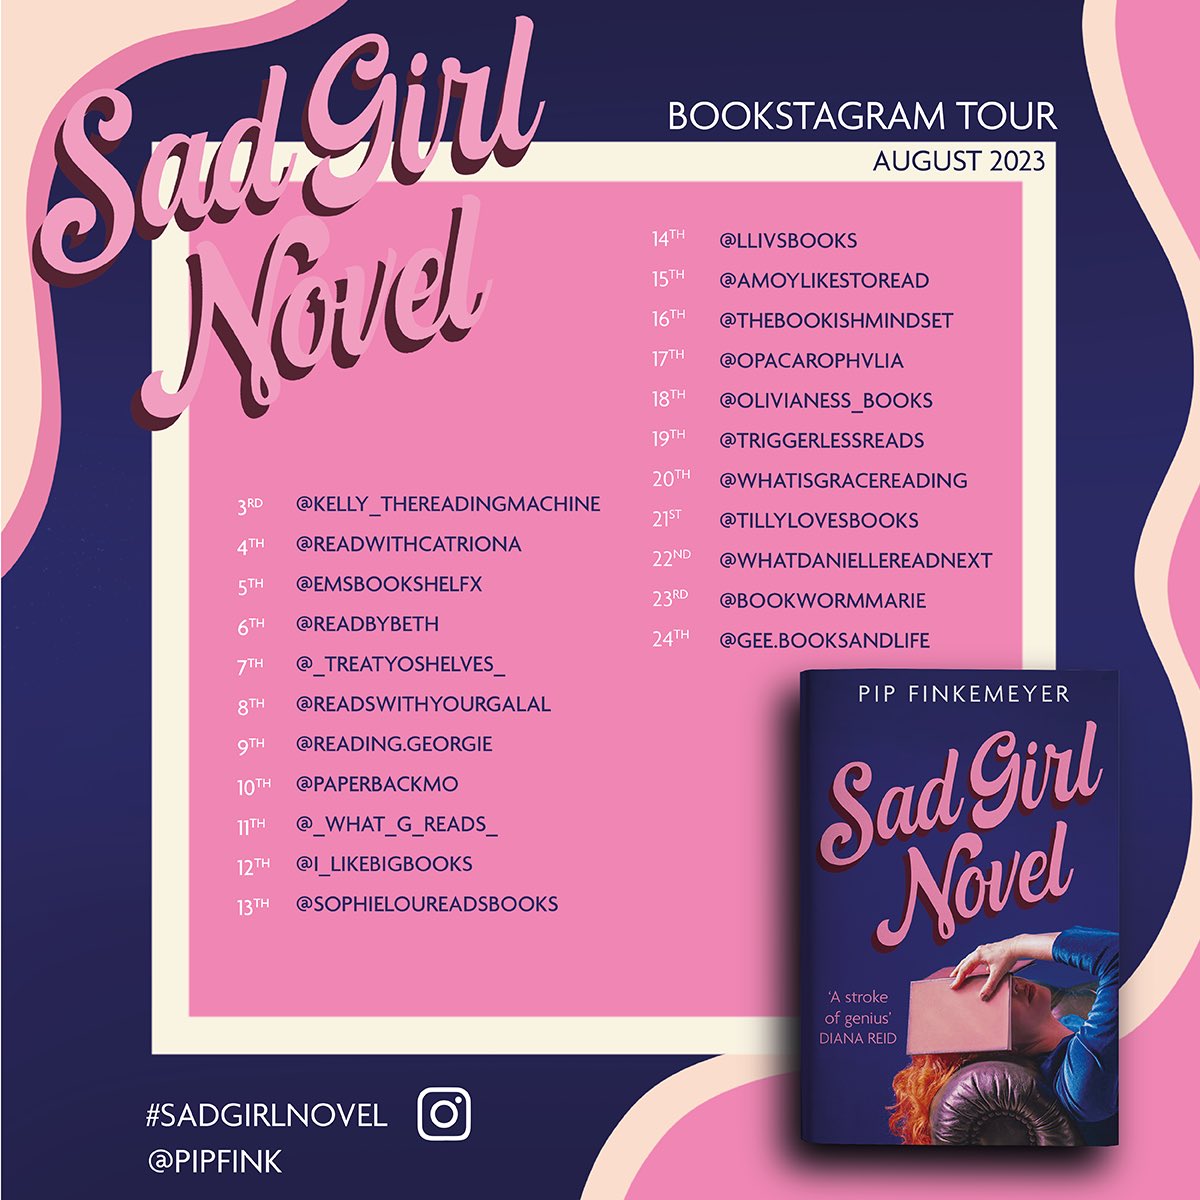 I’m so happy to have been able to take part in the #SadGirlNovel bookstagram tour today💜 I loved Sad Girl Novel, and if you’d like to read the rest of my thoughts and photos, you can find my insta post here instagram.com/p/Cv-O5d3NBa5/…
Thanks so much! @emily_egg @HodderBooks 🤩🤩